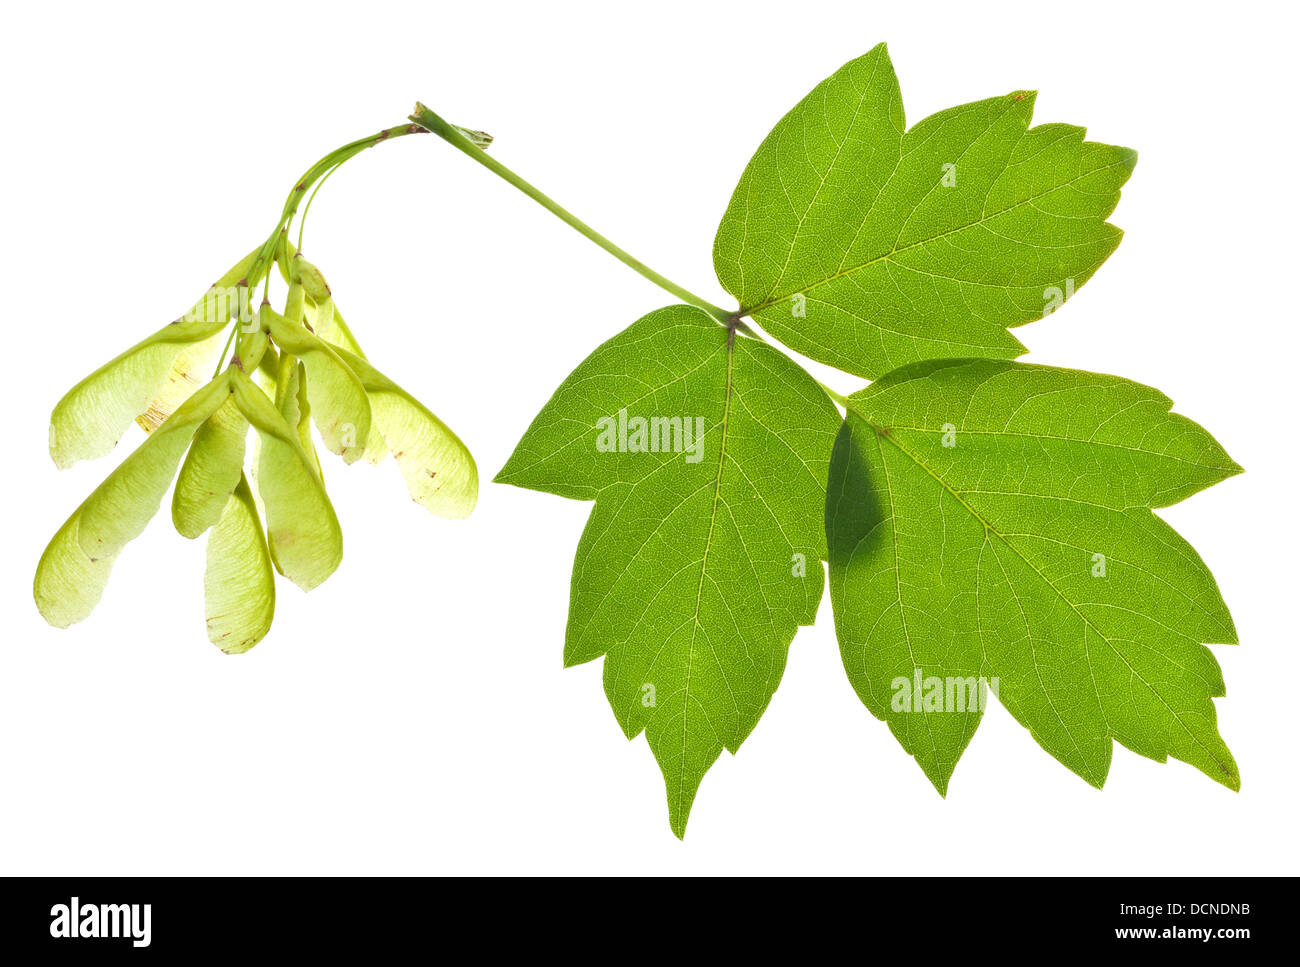 seeds and green leaves of ash tree isolated on white background Stock Photo